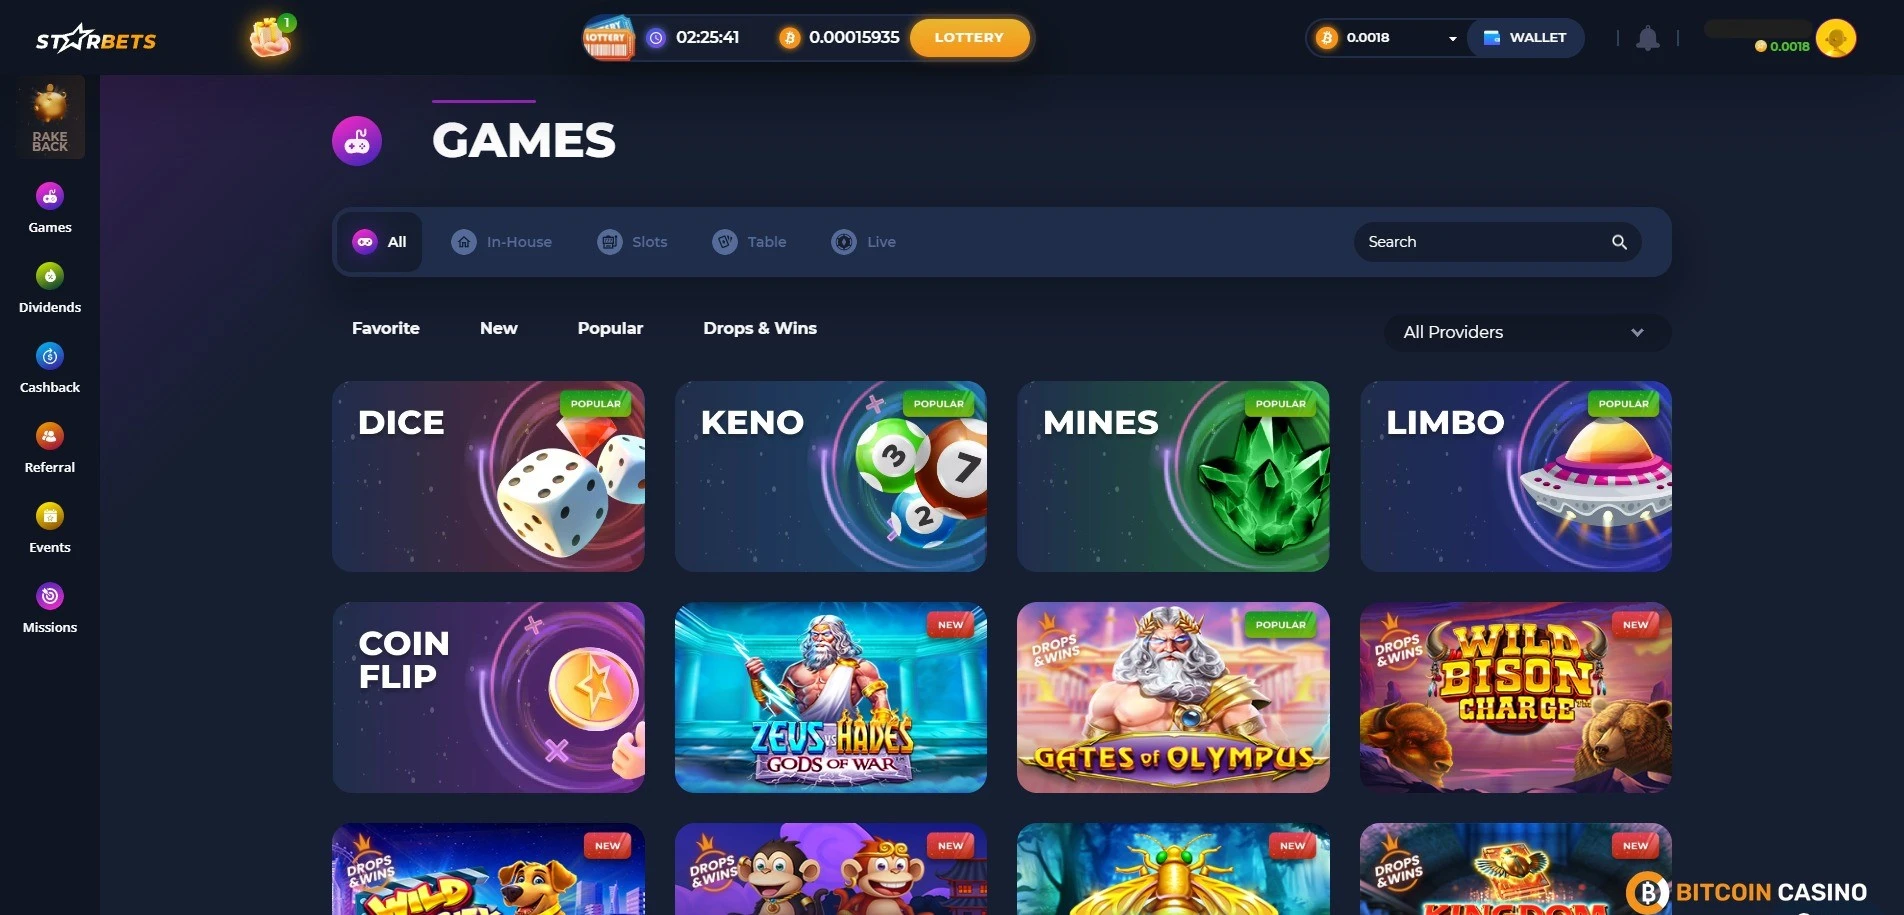 StarBets games lobby